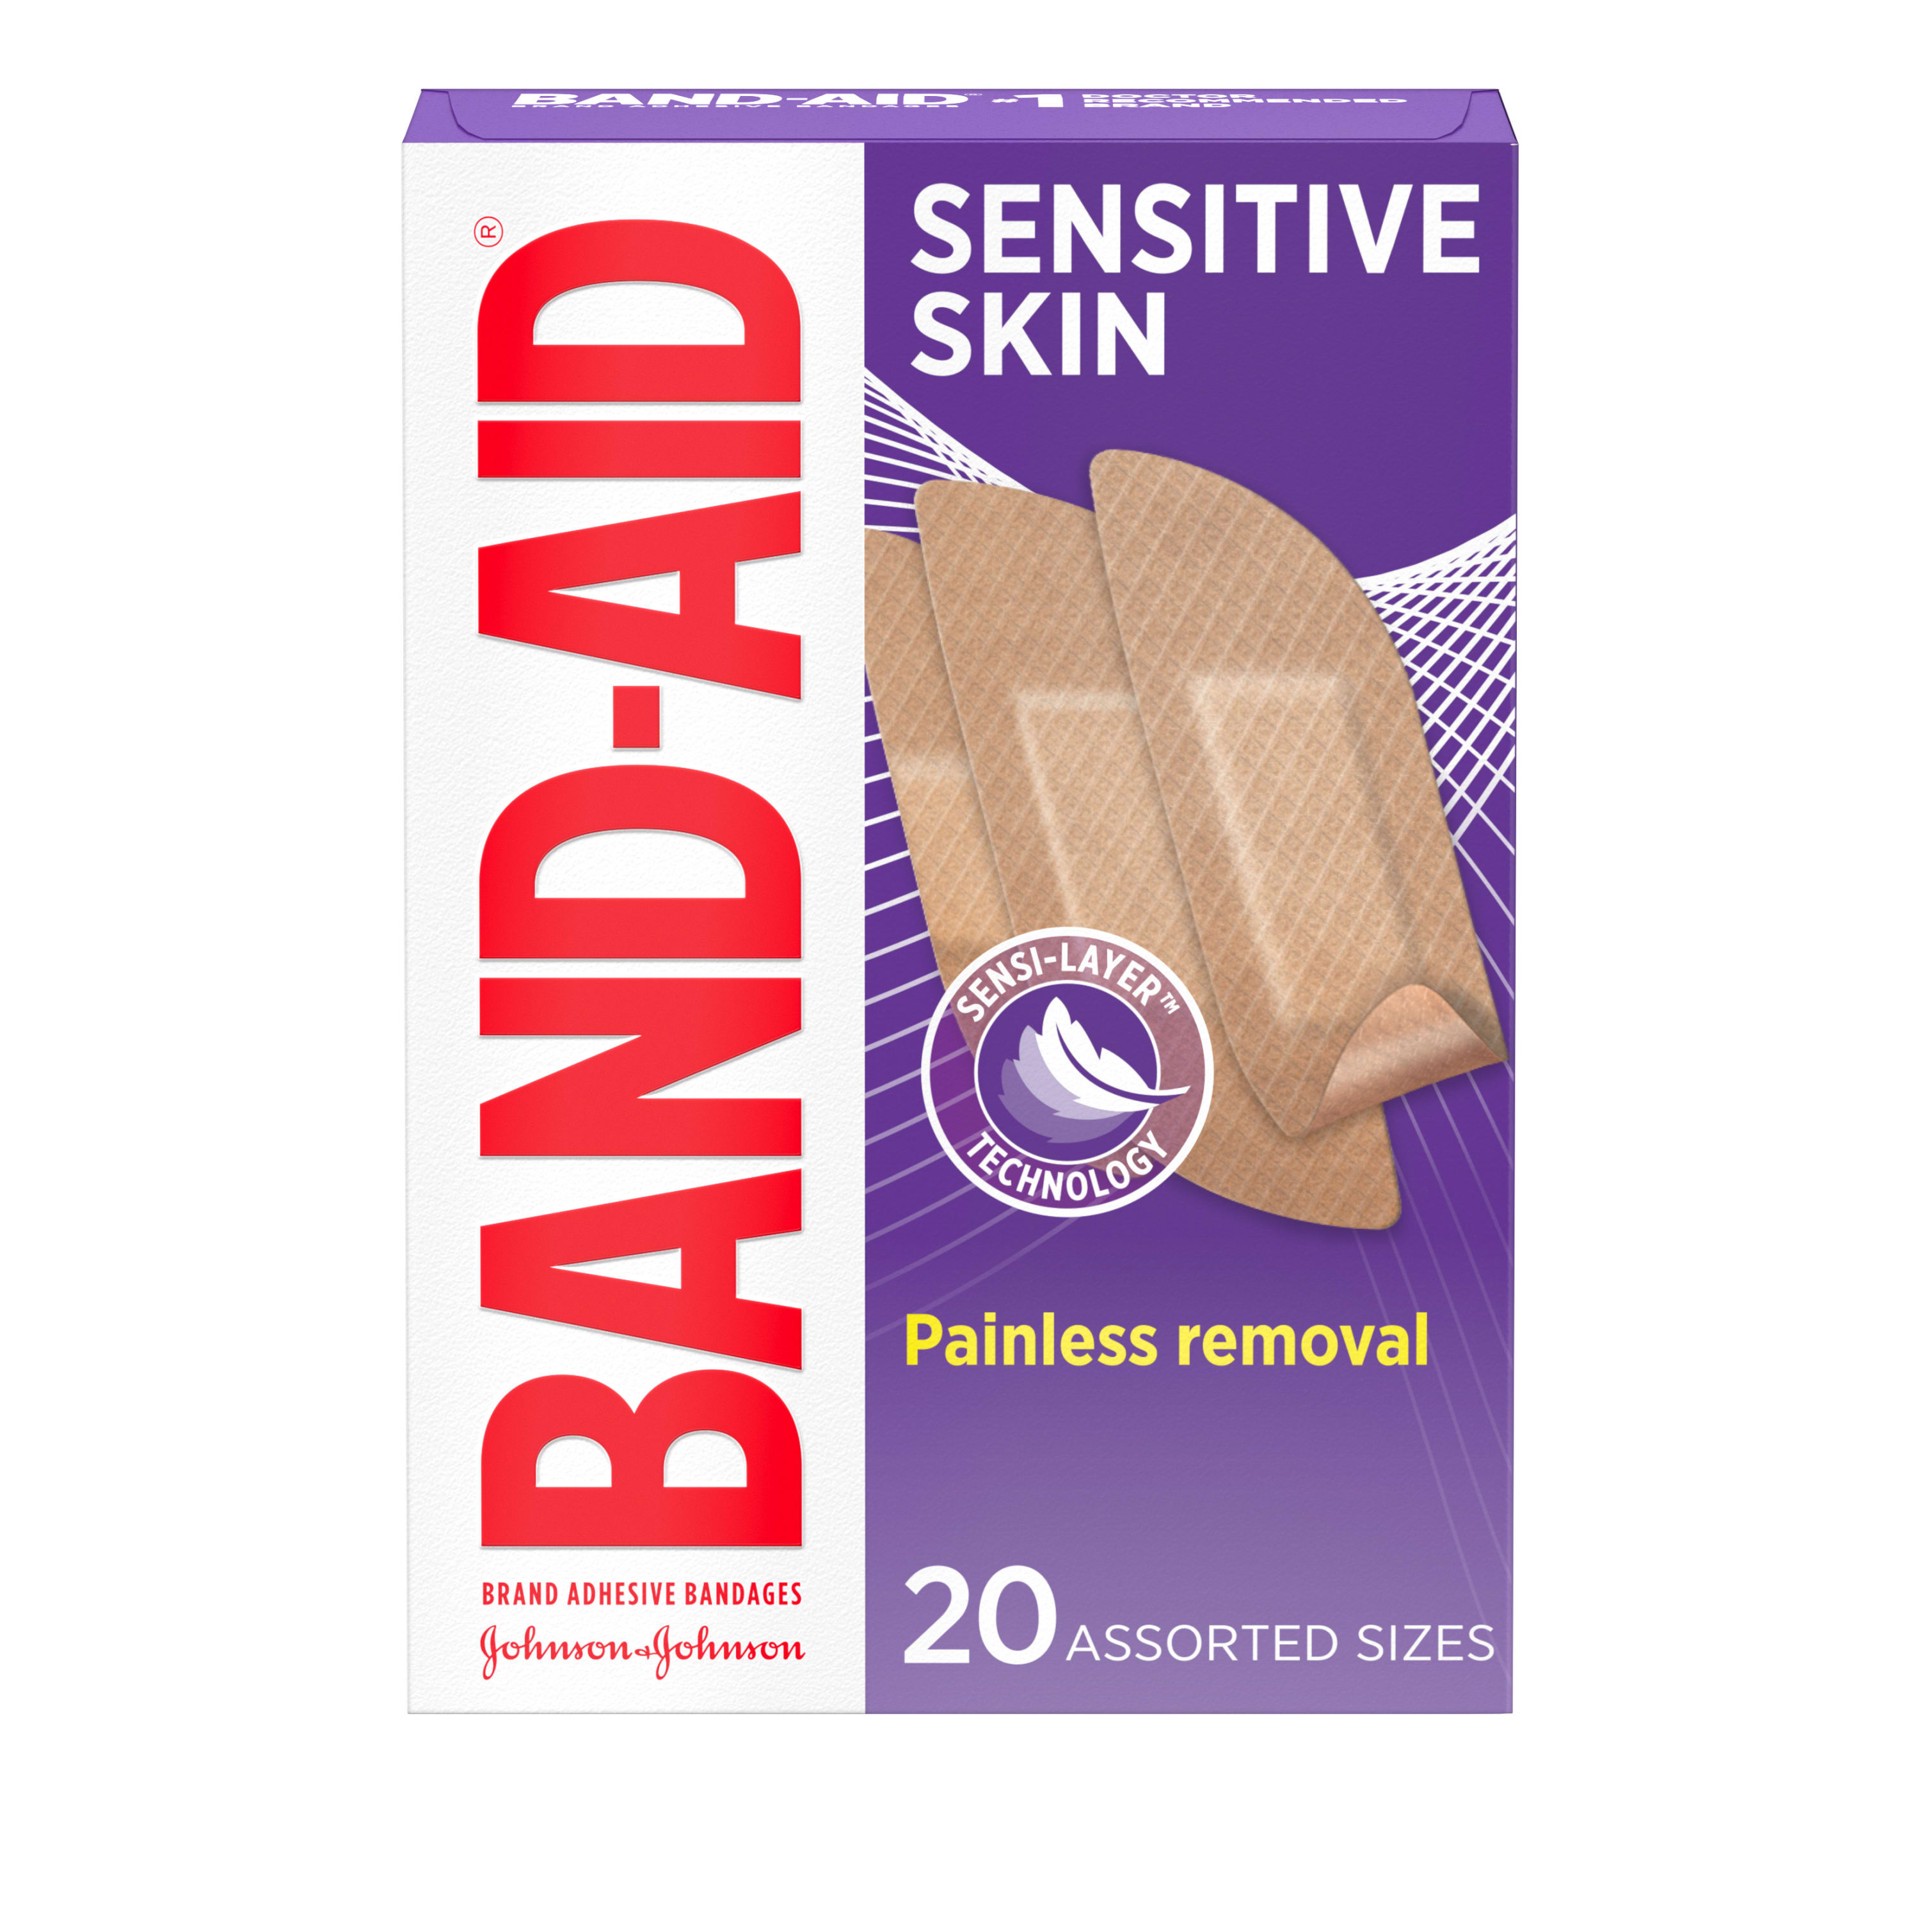 slide 1 of 8, BAND-AID Adhesive Bandages for Sensitive Skin, Hypoallergenic Bandages with Painless Removal, Stays on When Wet and Suitable for Eczema Prone Skin, Sterile, Assorted Sizes, 20 ct, 20 ct